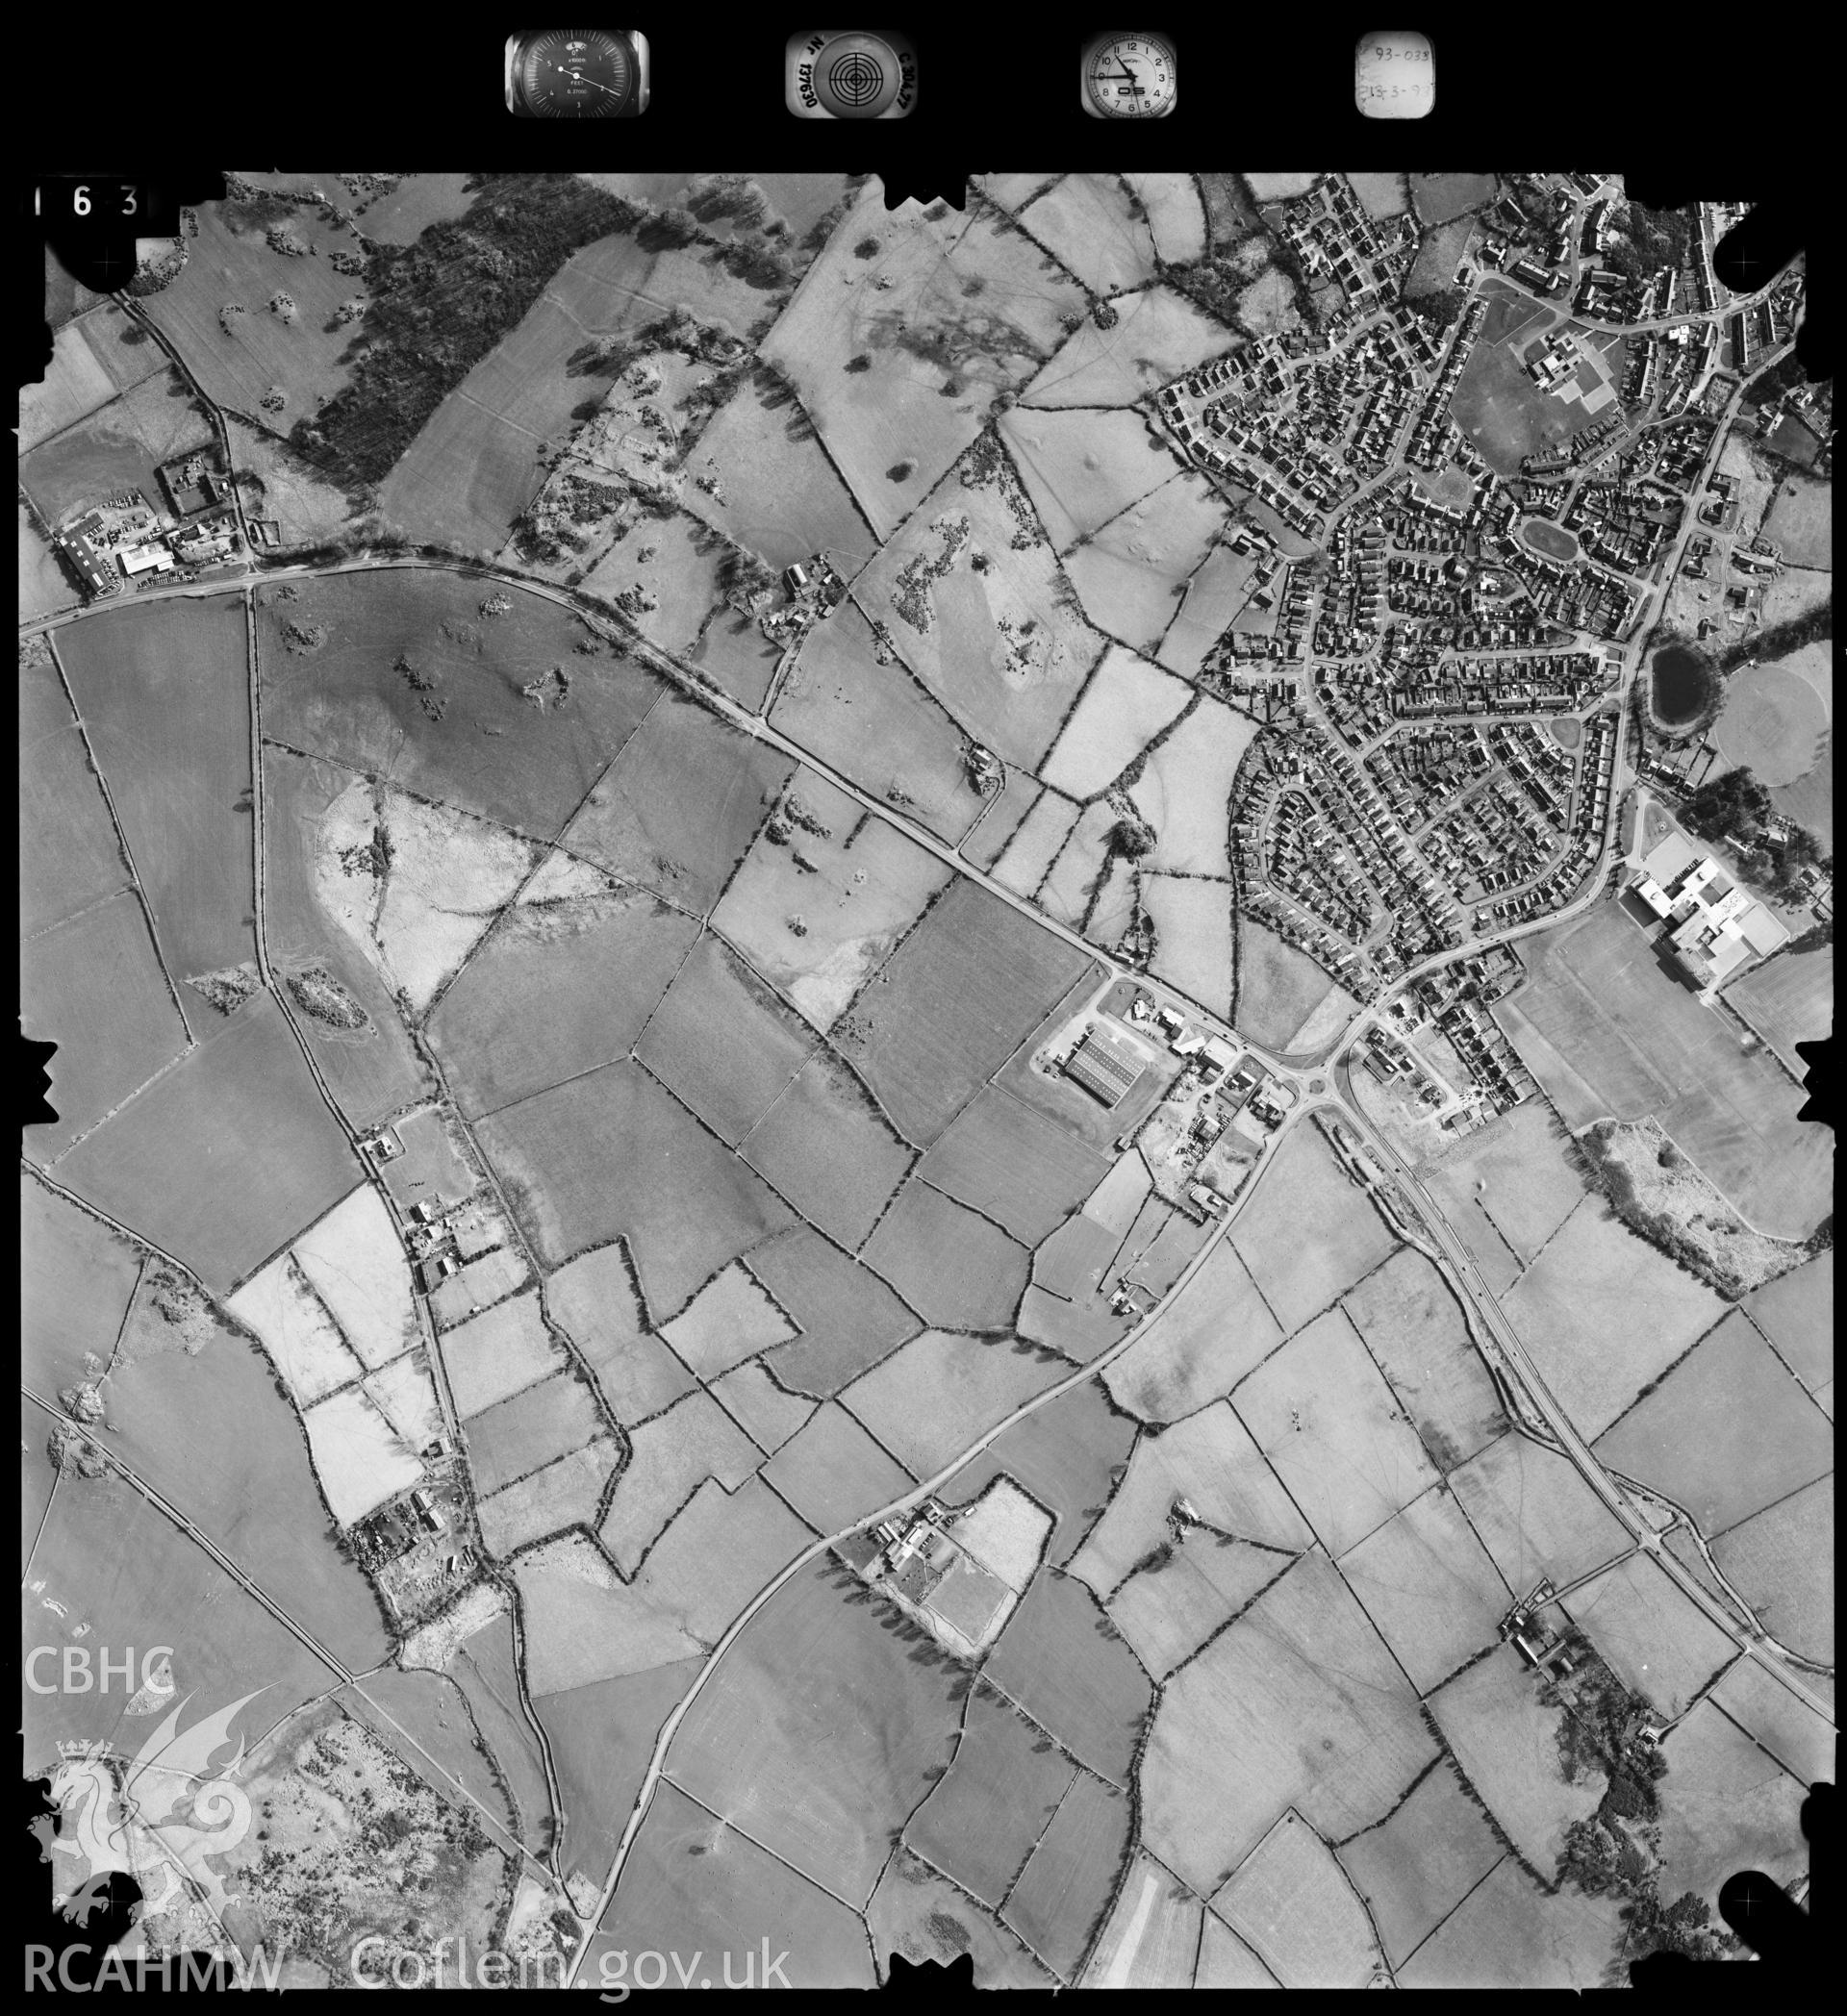 Digitized copy of an aerial photograph showing area to the north-west of Menai Bridge, taken by Ordnance Survey, 1993.